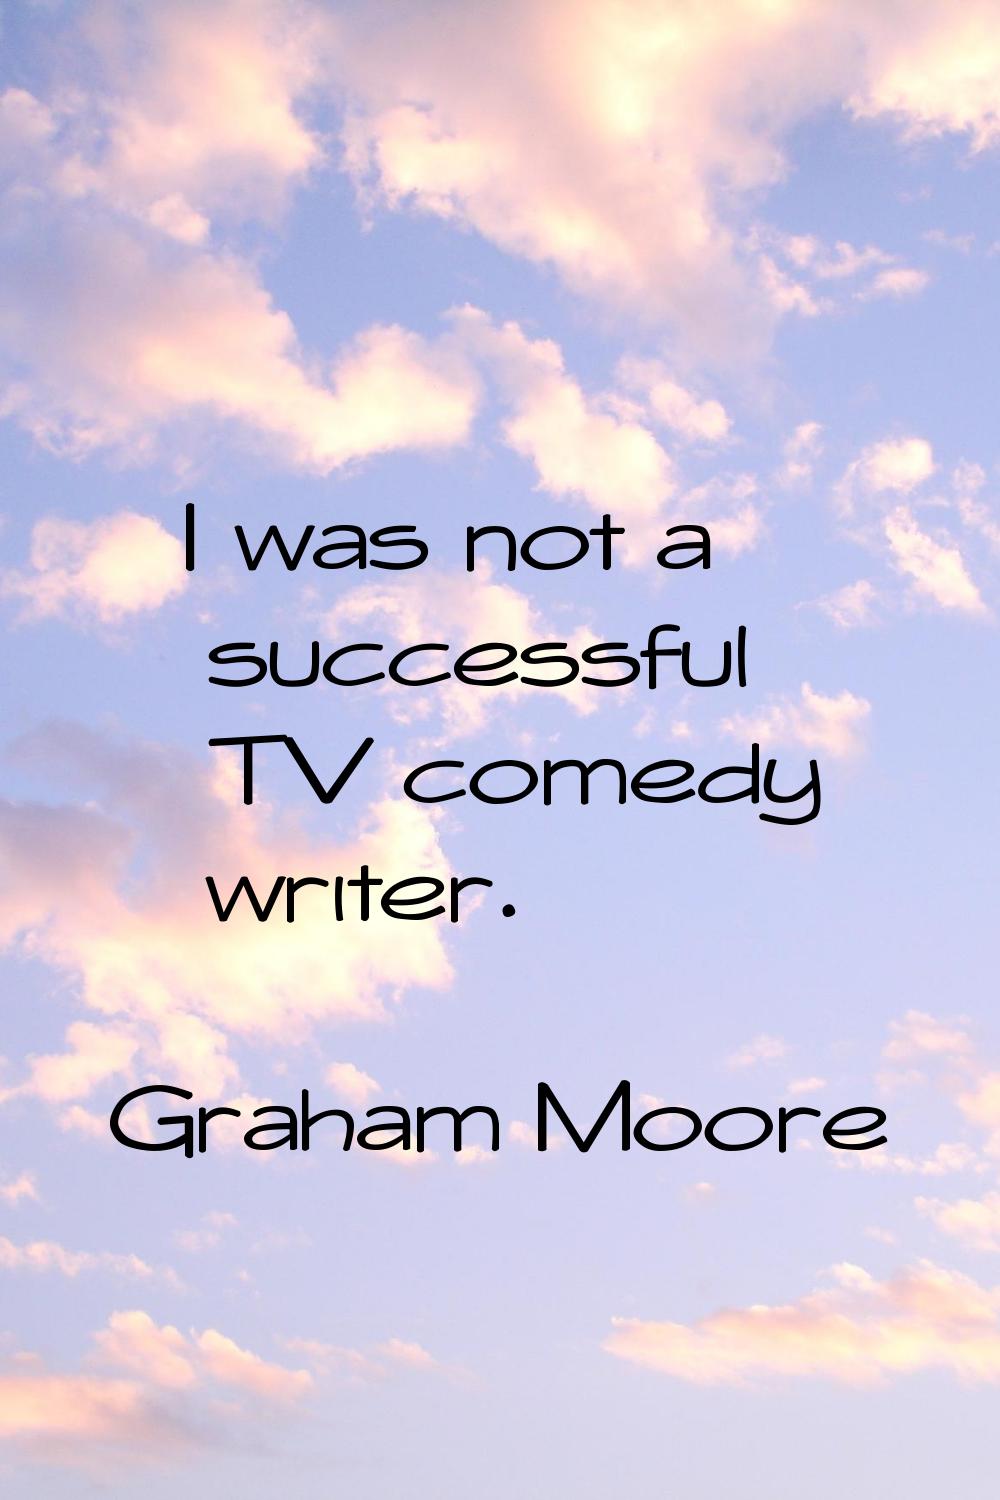 I was not a successful TV comedy writer.